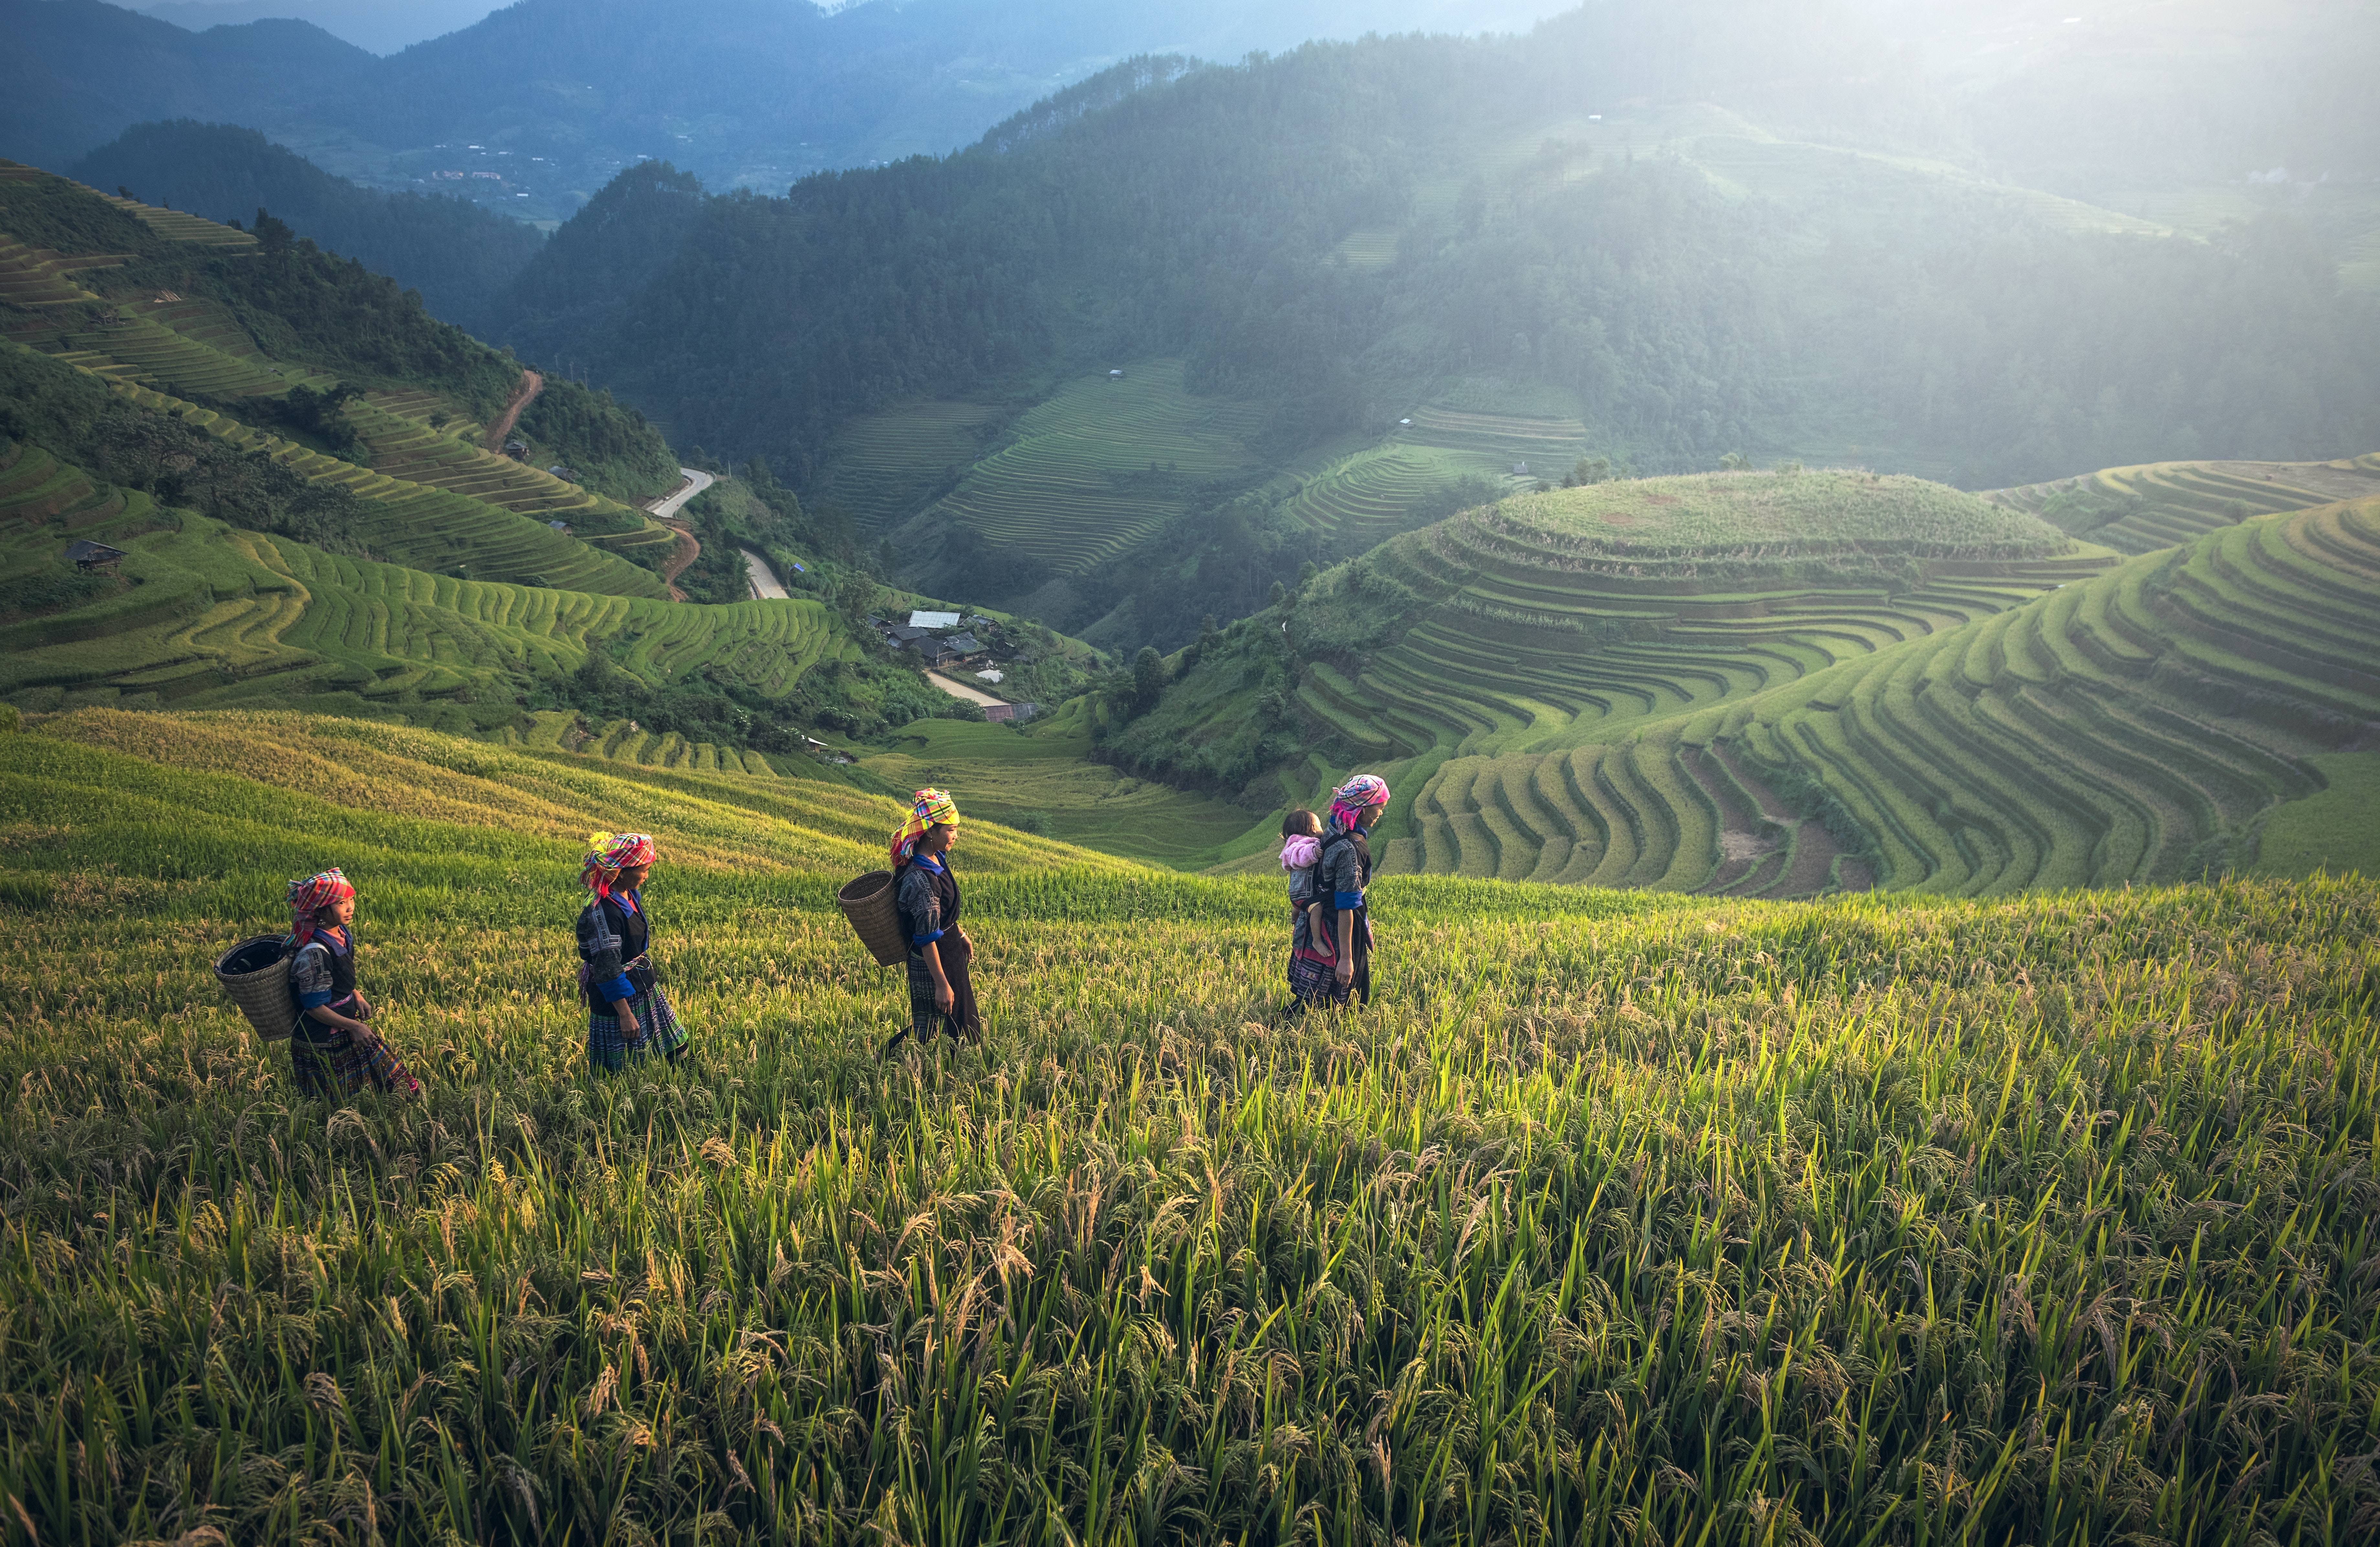 Cultivation Terraces: A tradition in the face of the challenges of climate change